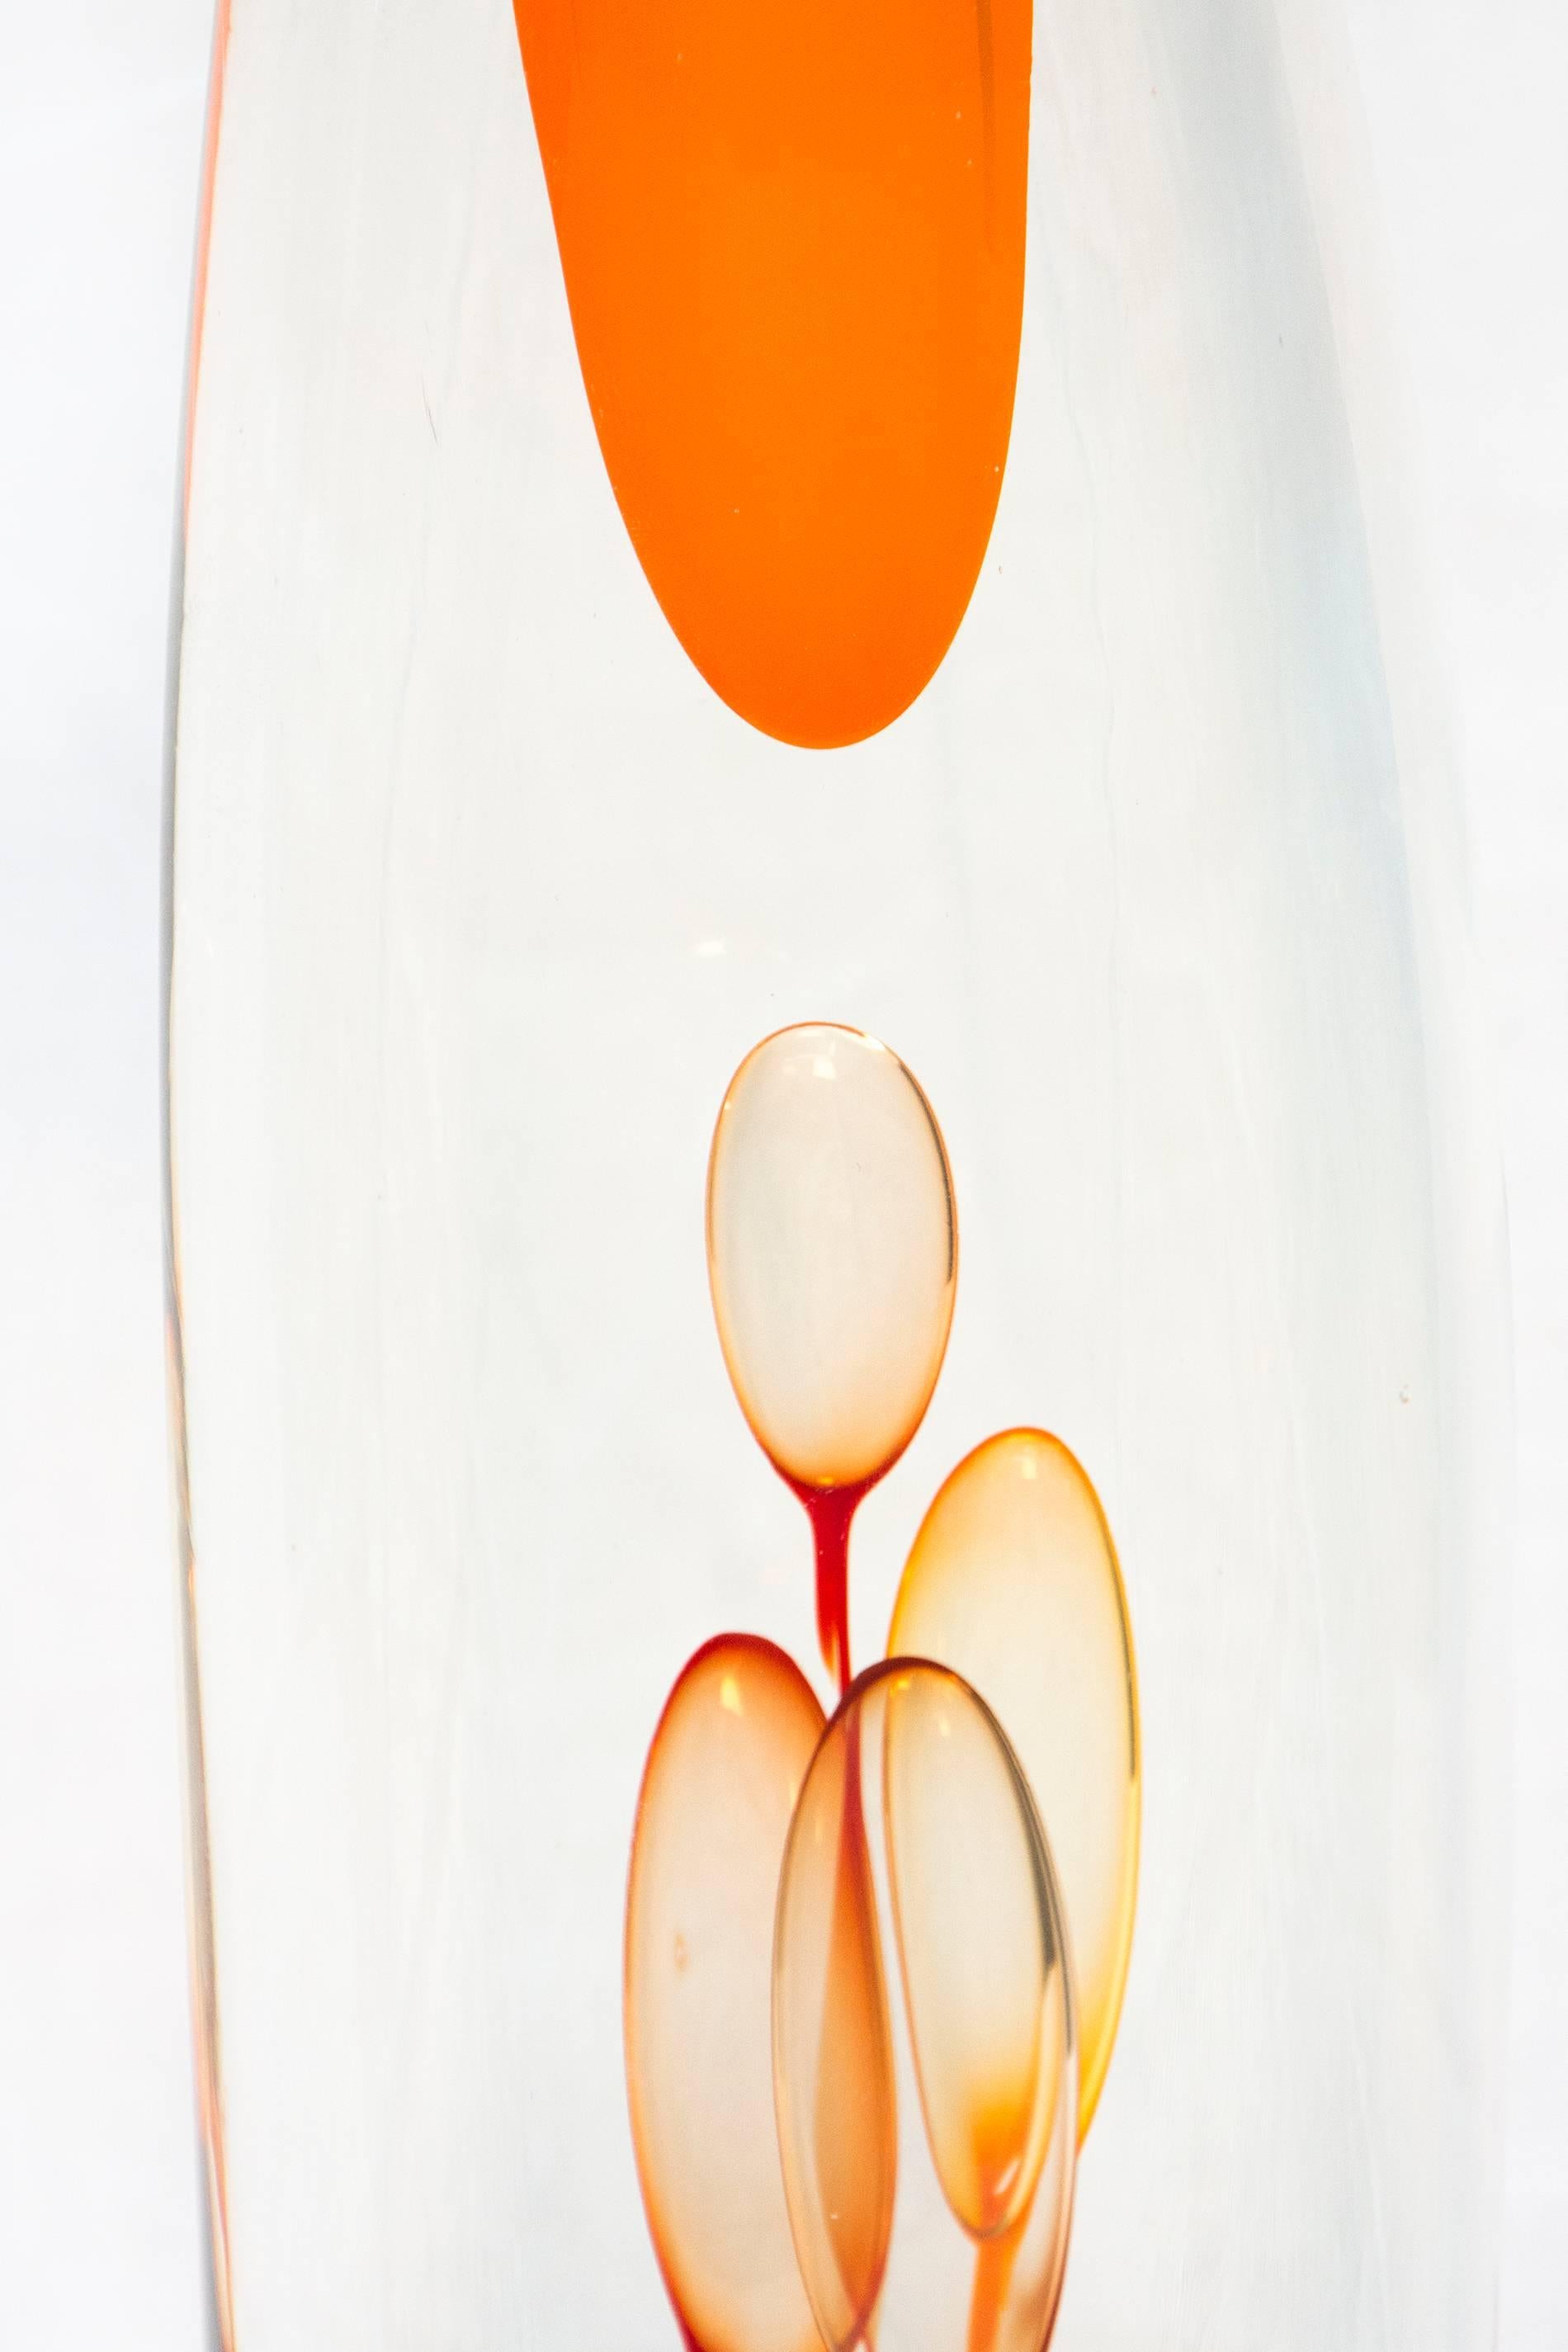 This vibrant and elegant orange blown glass sculpture is created by renowned Australian glass artist, Eileen Gordon. It is tall and thin and its shape is as effortless as a wisp of smoke rising into air. Small bubbles give it the illusion of fluid. 